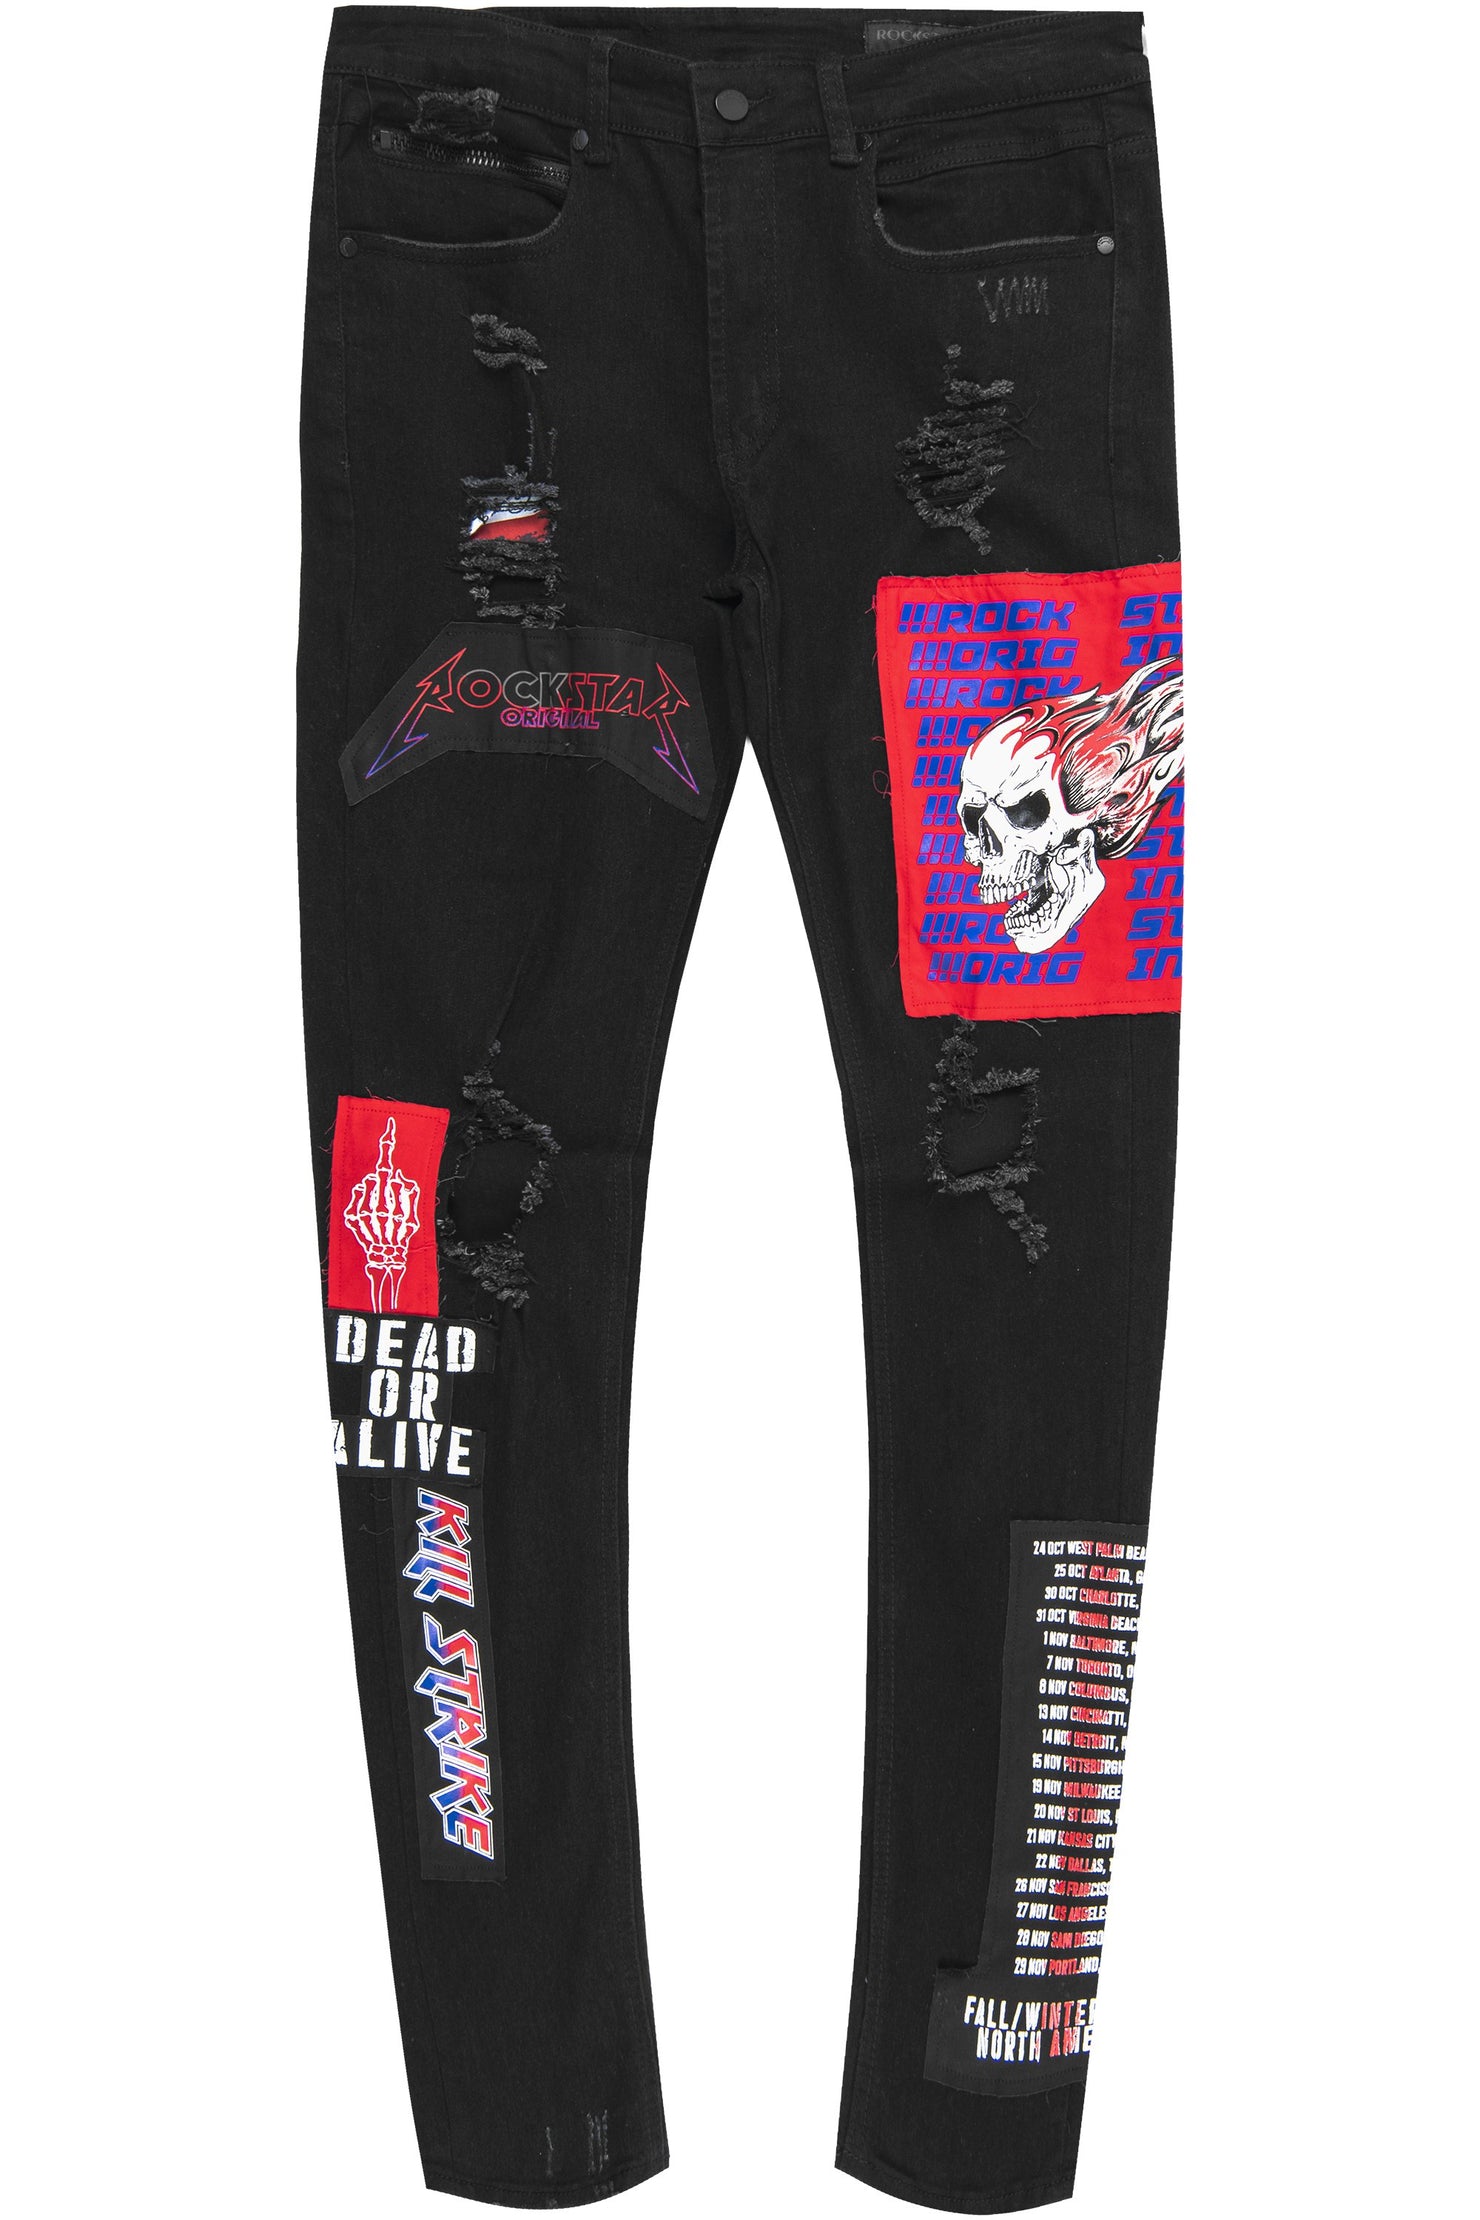 Cannon Patchwork Jean- Black/Red